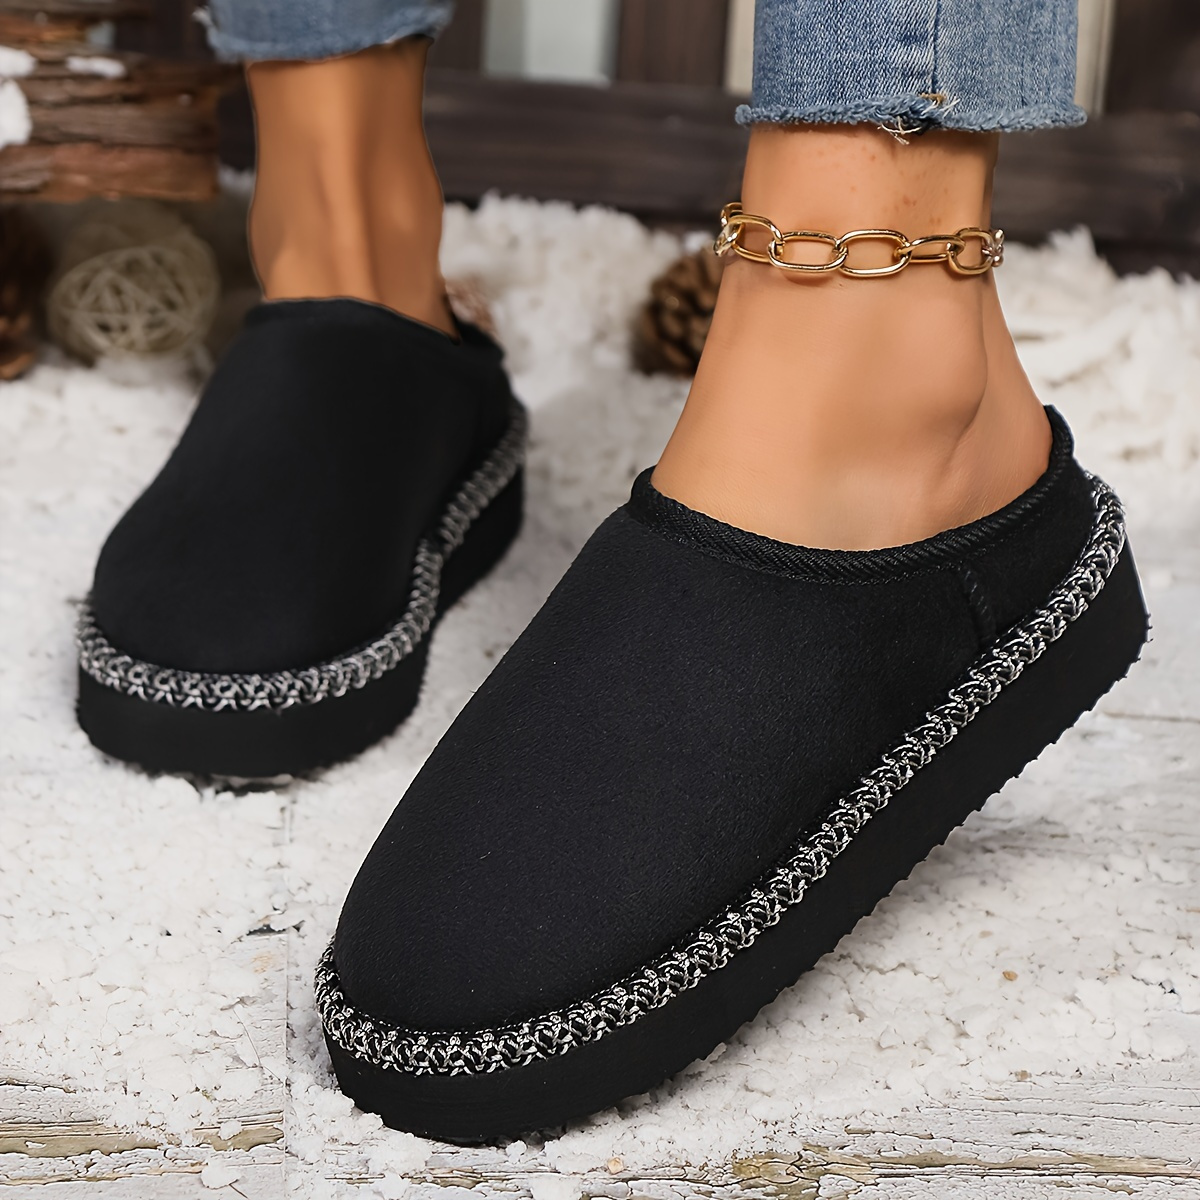 nsendm Female Shoes Adult Character Slippers for Women Bow Tie Soft Sole  Casual Open Toe Non Slip Flat Breathable Slippers Classic Slippers Women